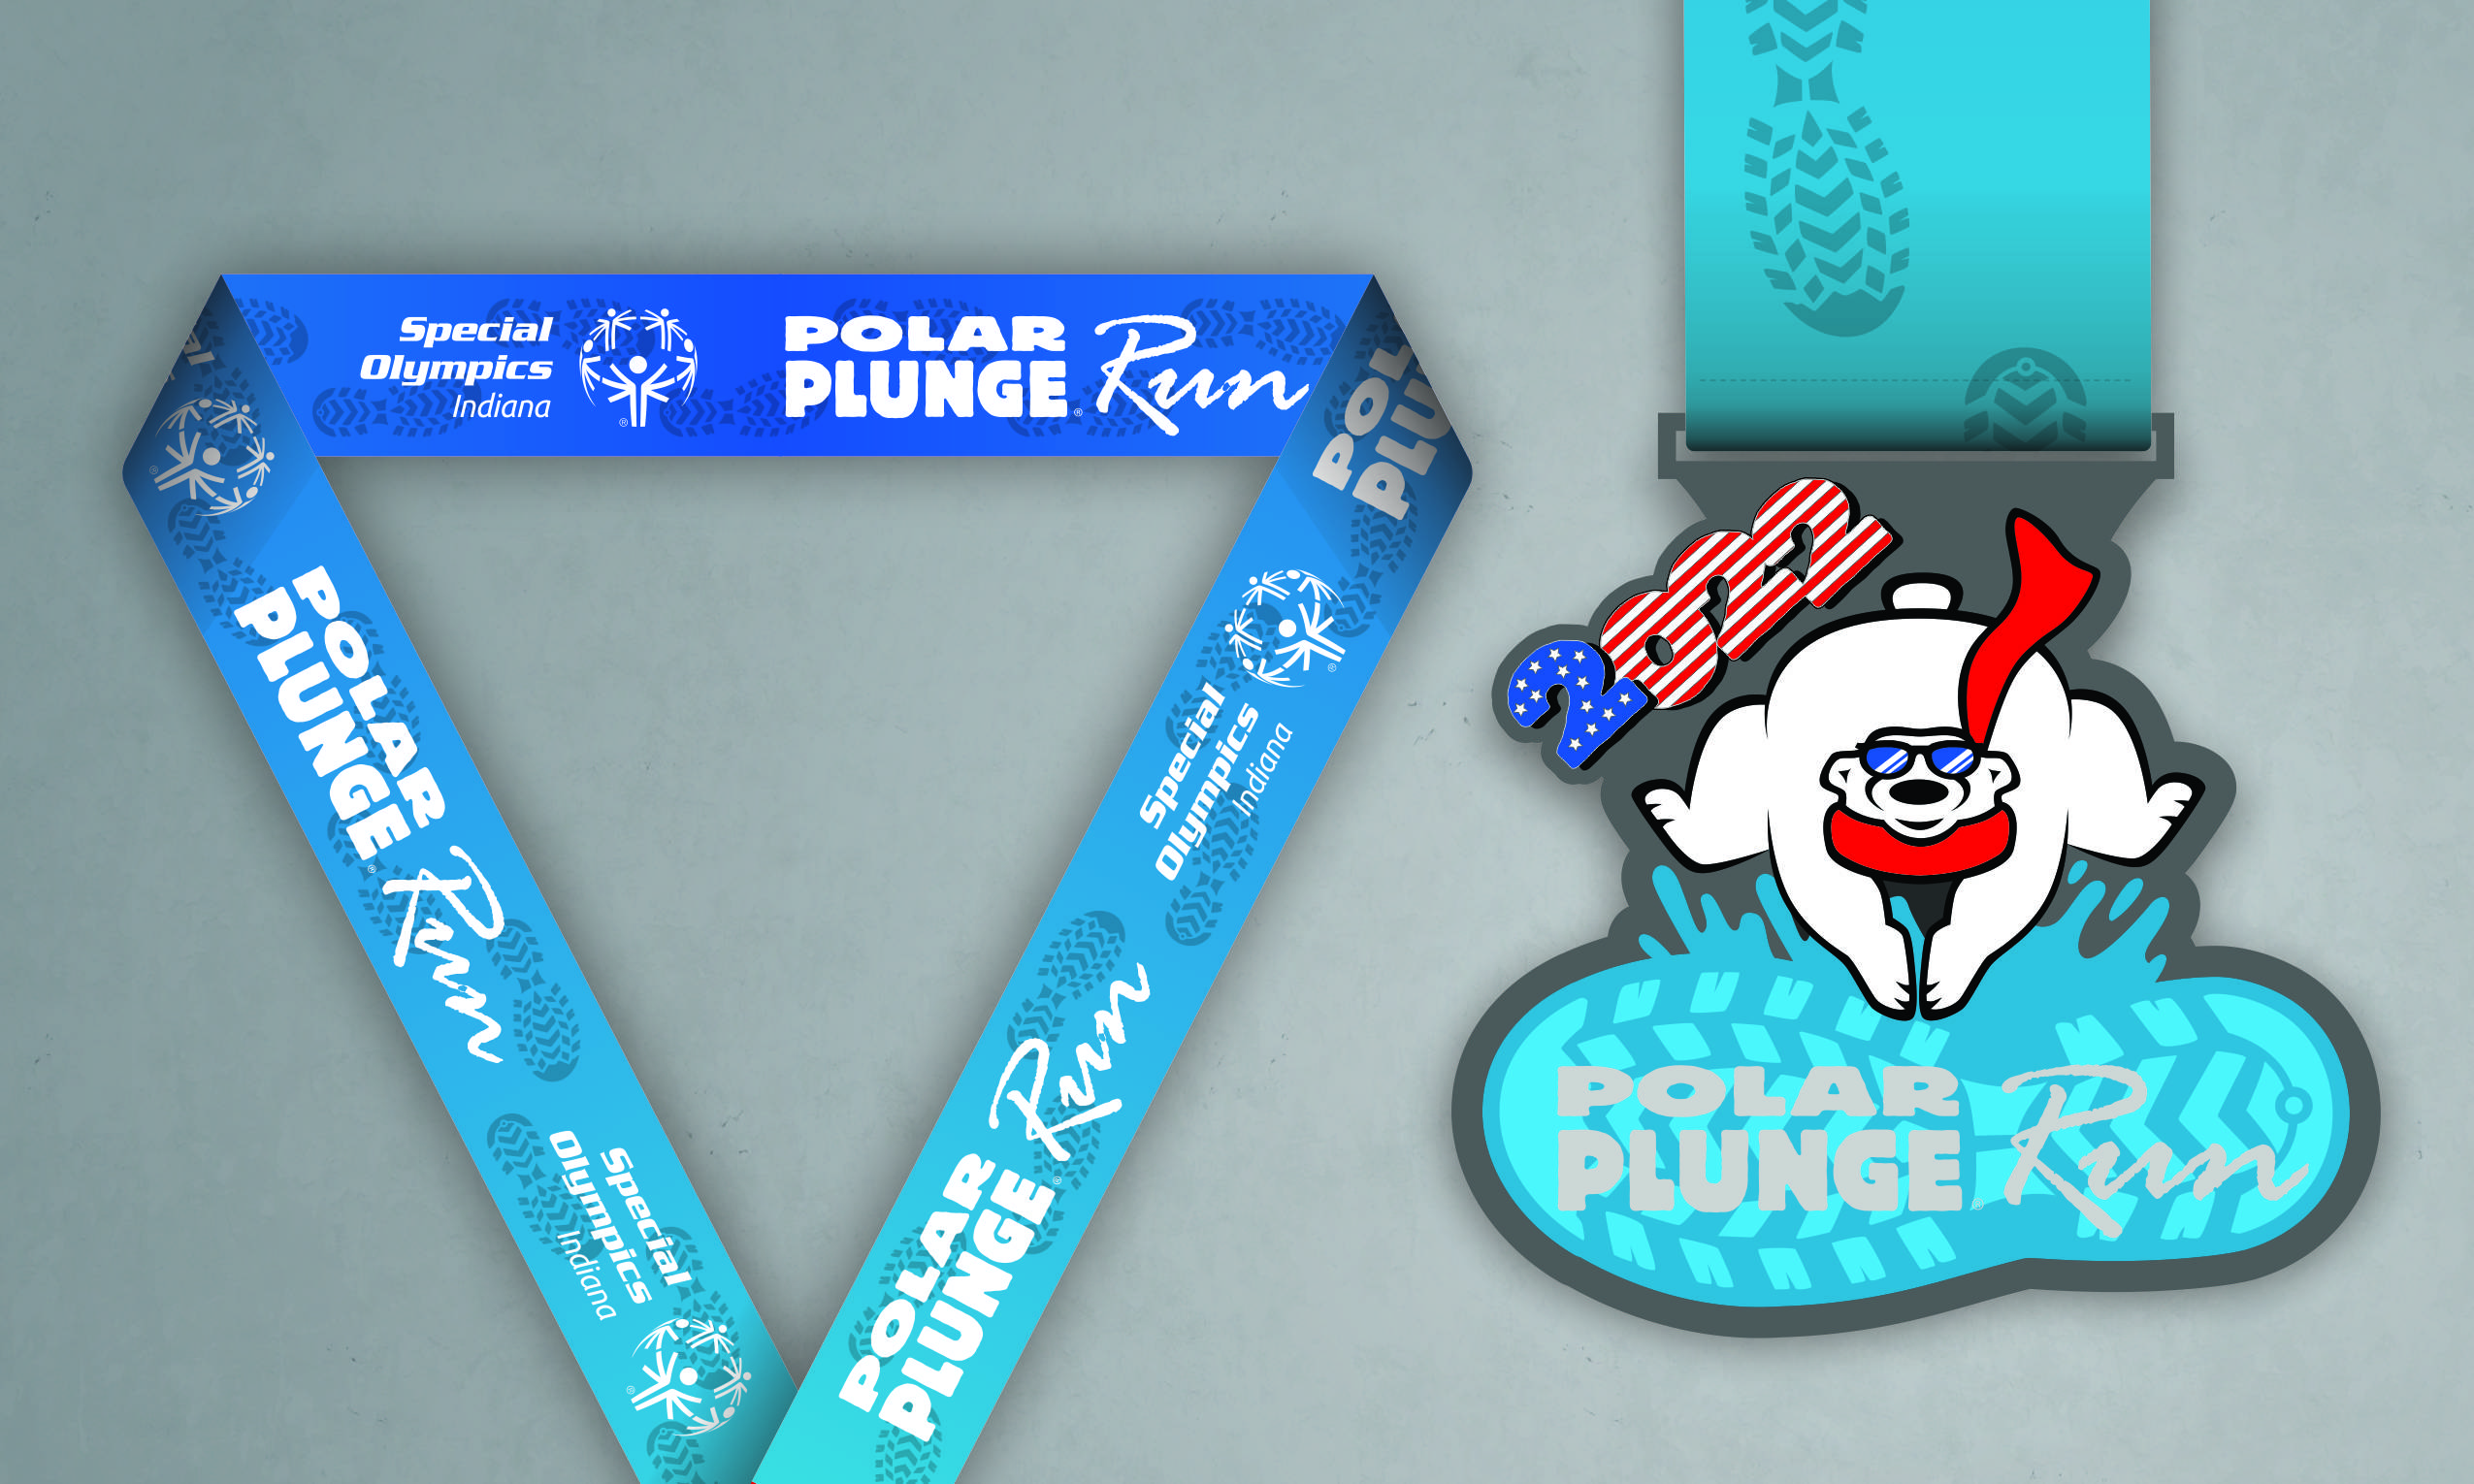 2022 Polar Plunge Run will be earned by those who participate and raise a minimum of $85 for Special Olympics Indiana online.